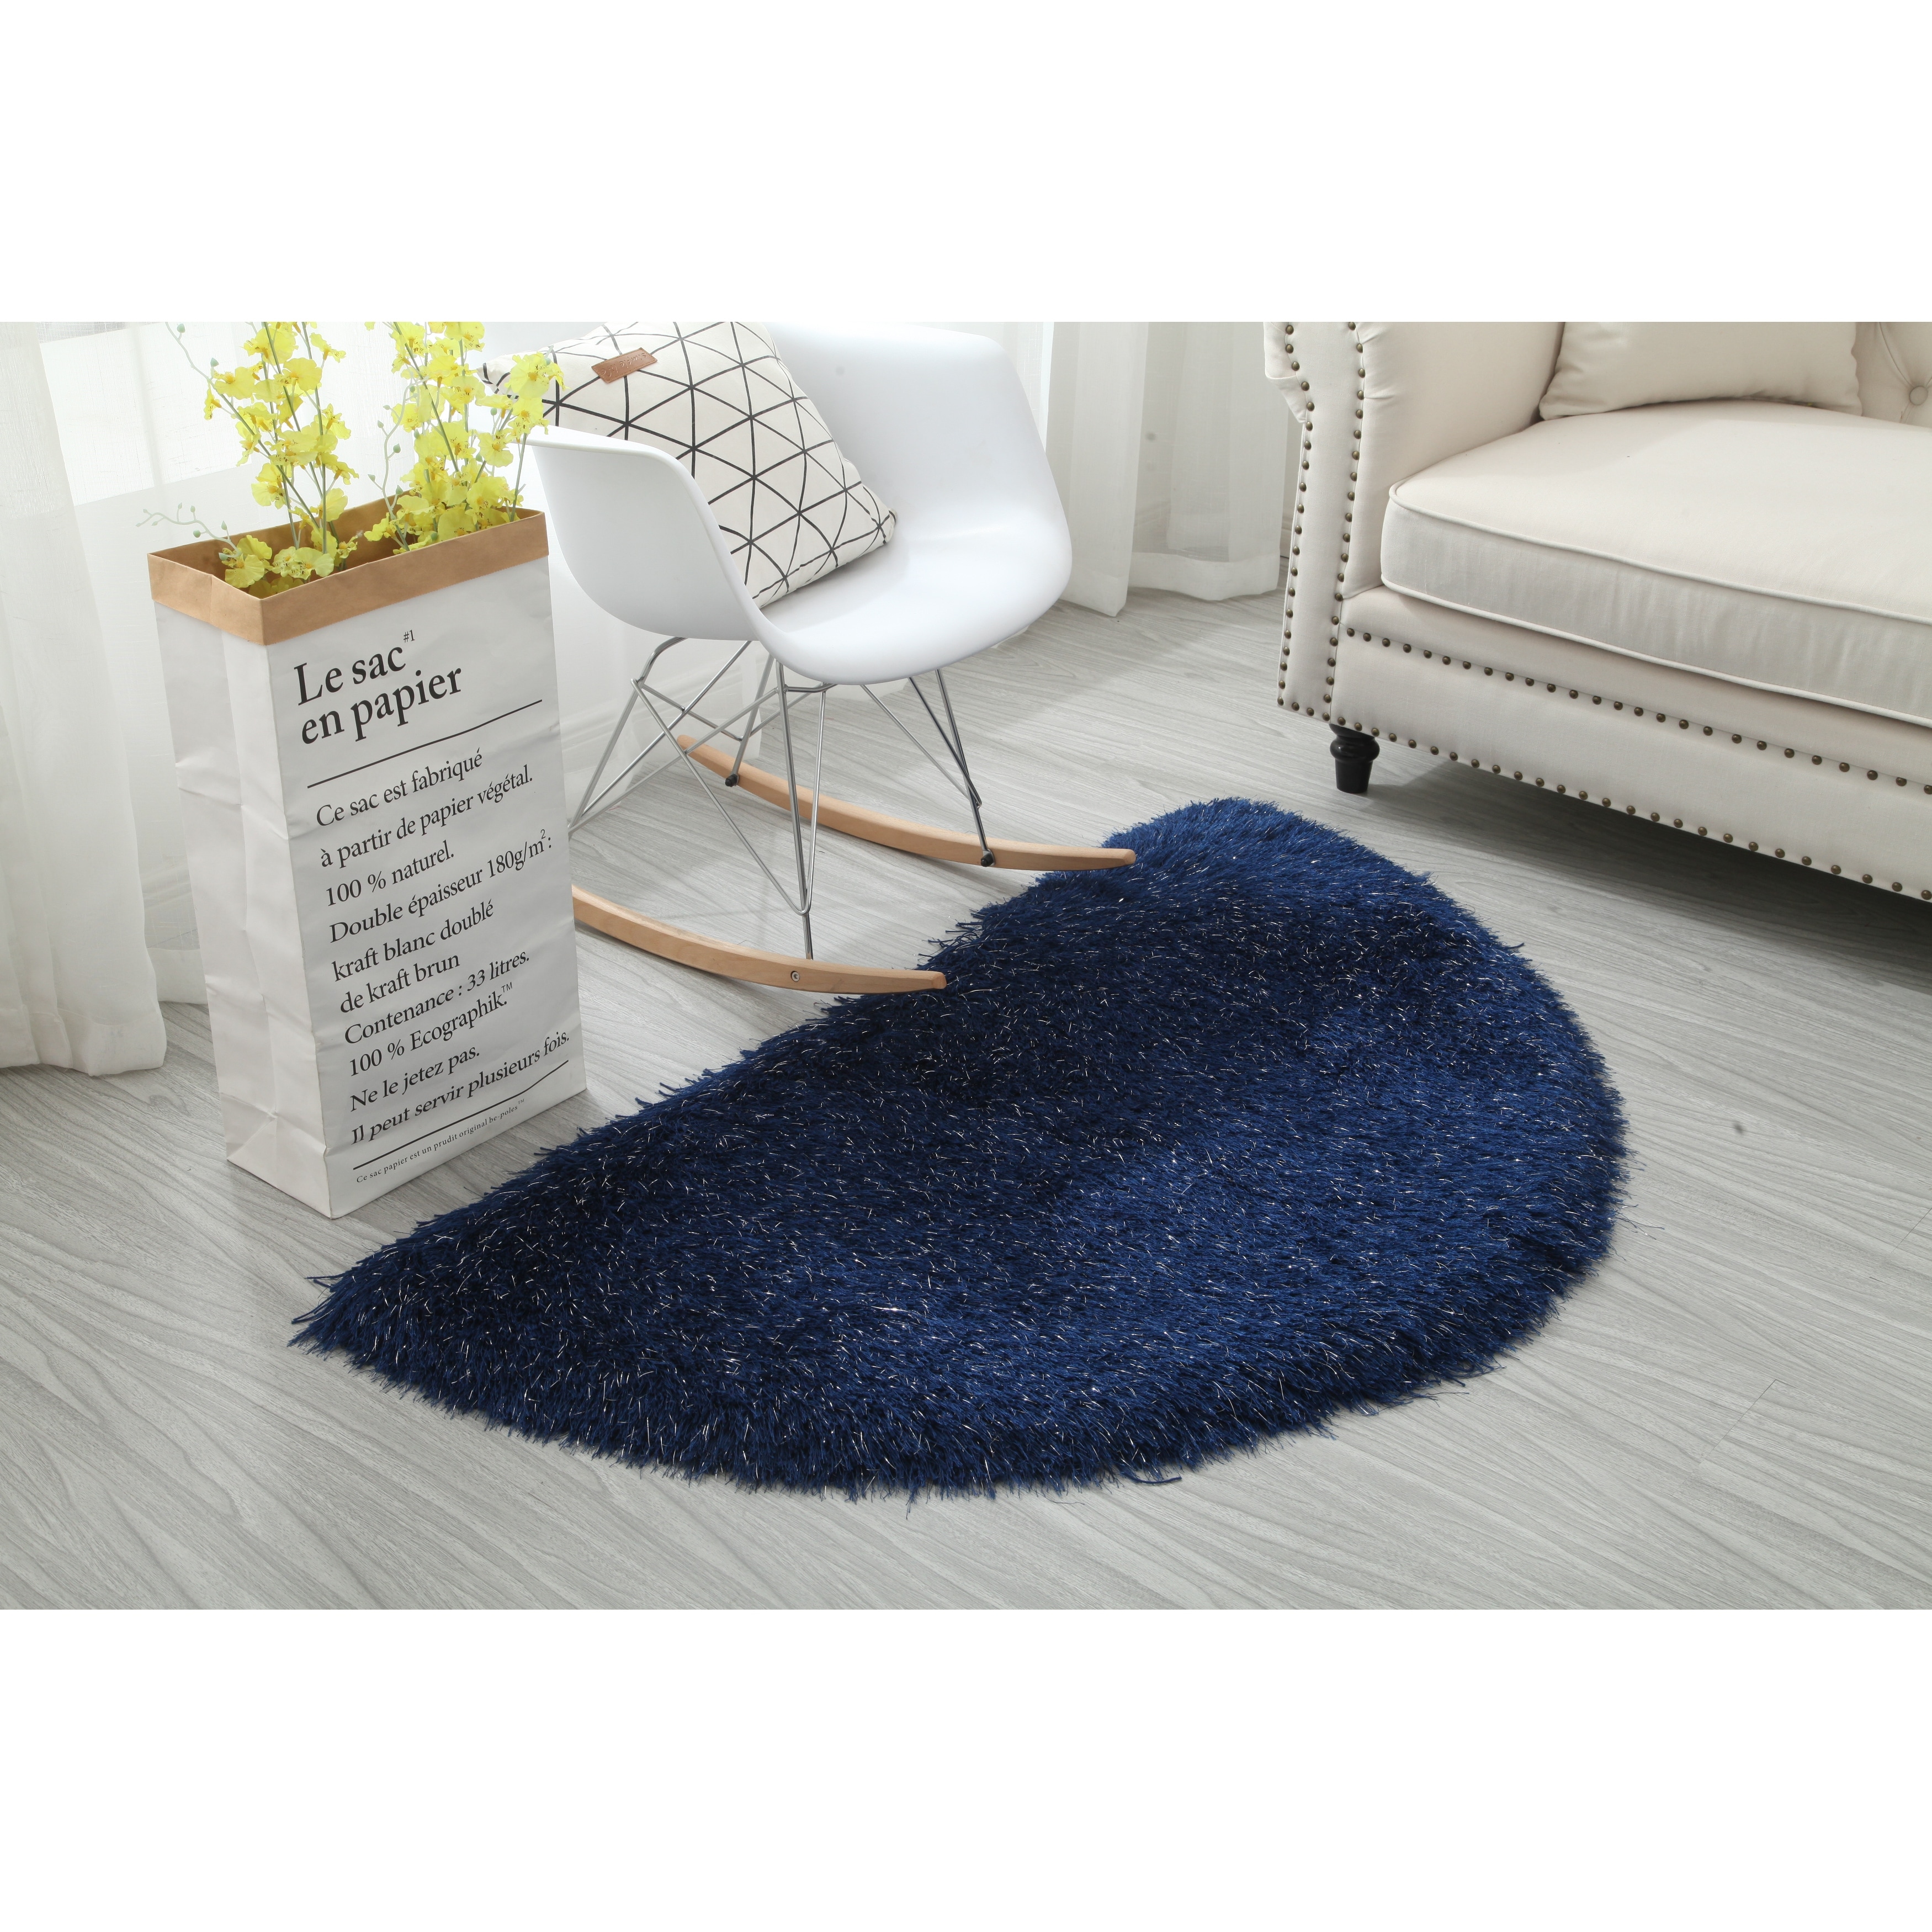 315635 Hand-Knotted Area Rug for Living Room Bedroom Galleria Casual Grey Rug 5'2 x 7'5 